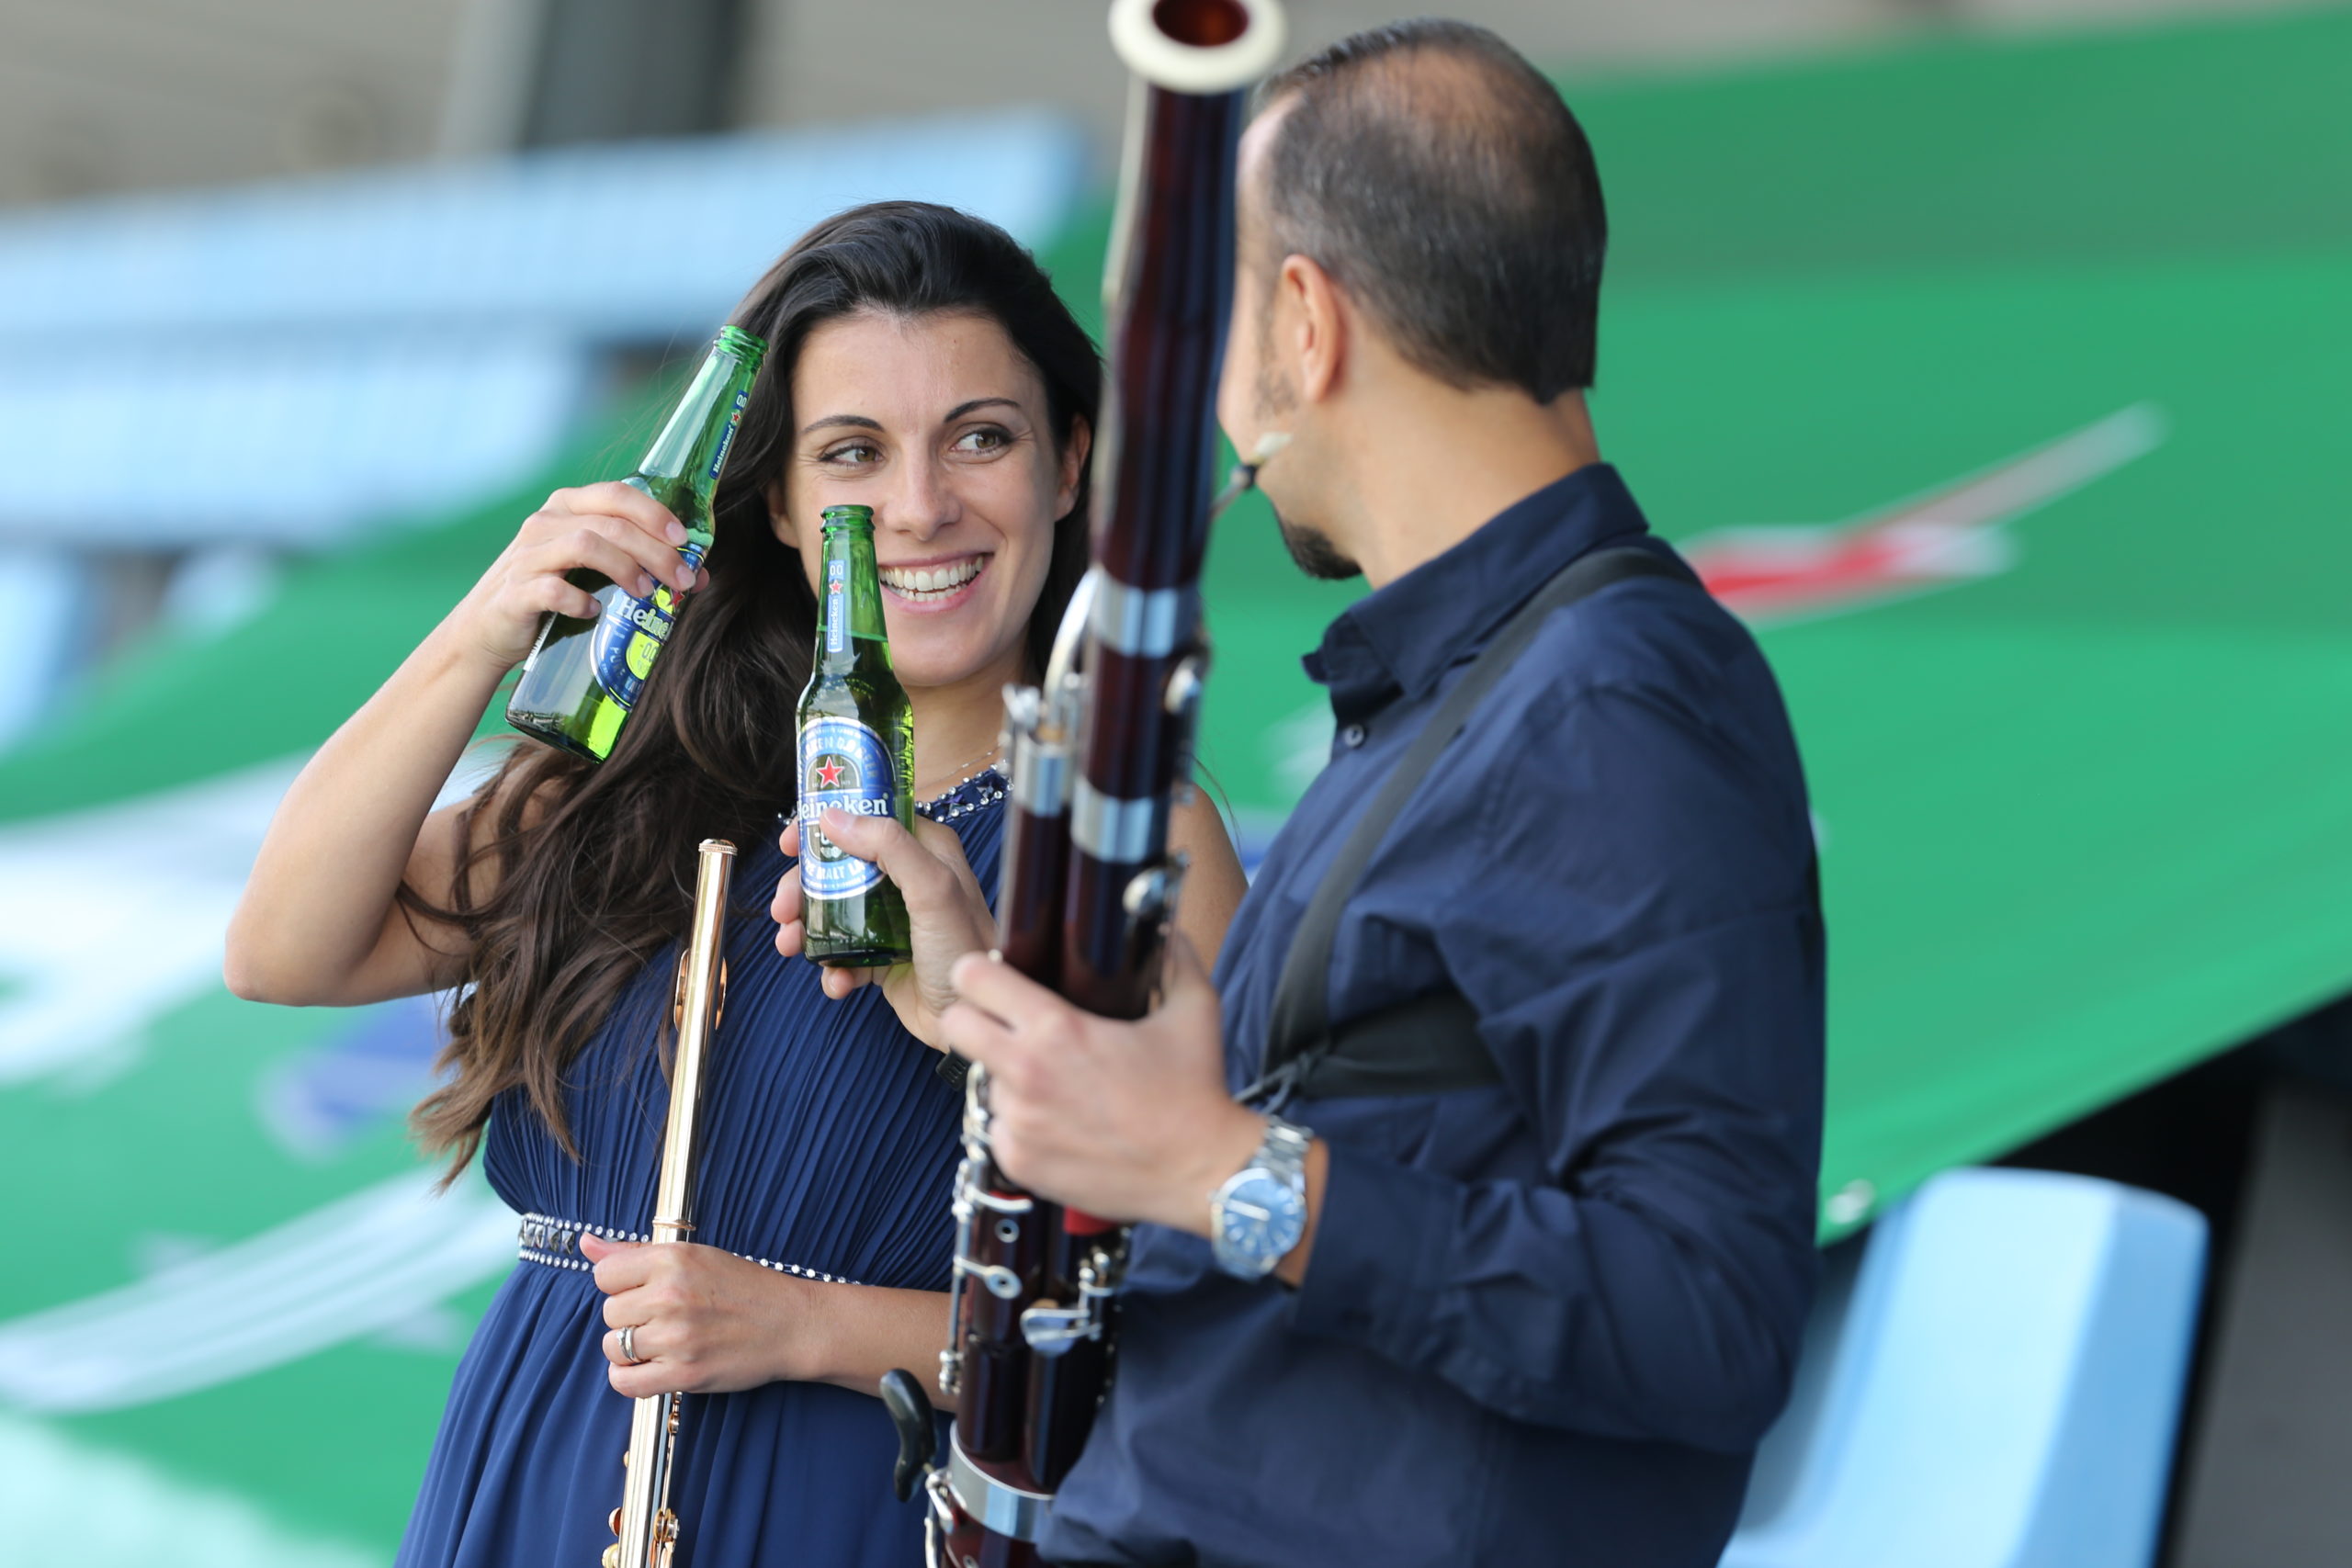 Claudia Bucchini and Andrea Zucco enjoy a Heineken 0.0 after the performance